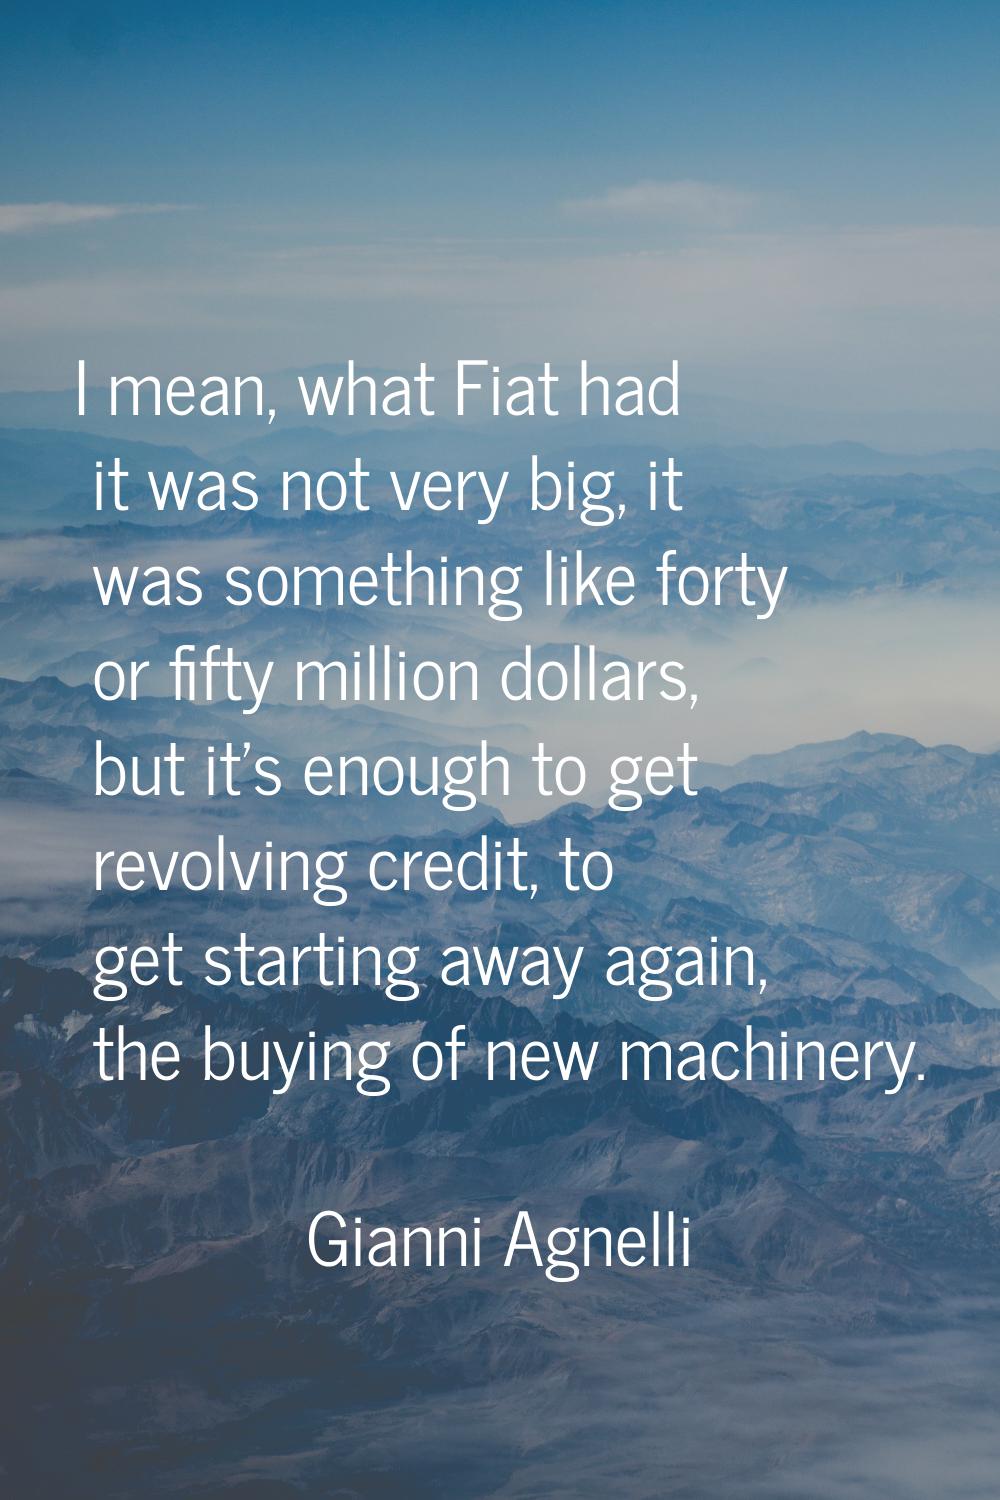 I mean, what Fiat had it was not very big, it was something like forty or fifty million dollars, bu